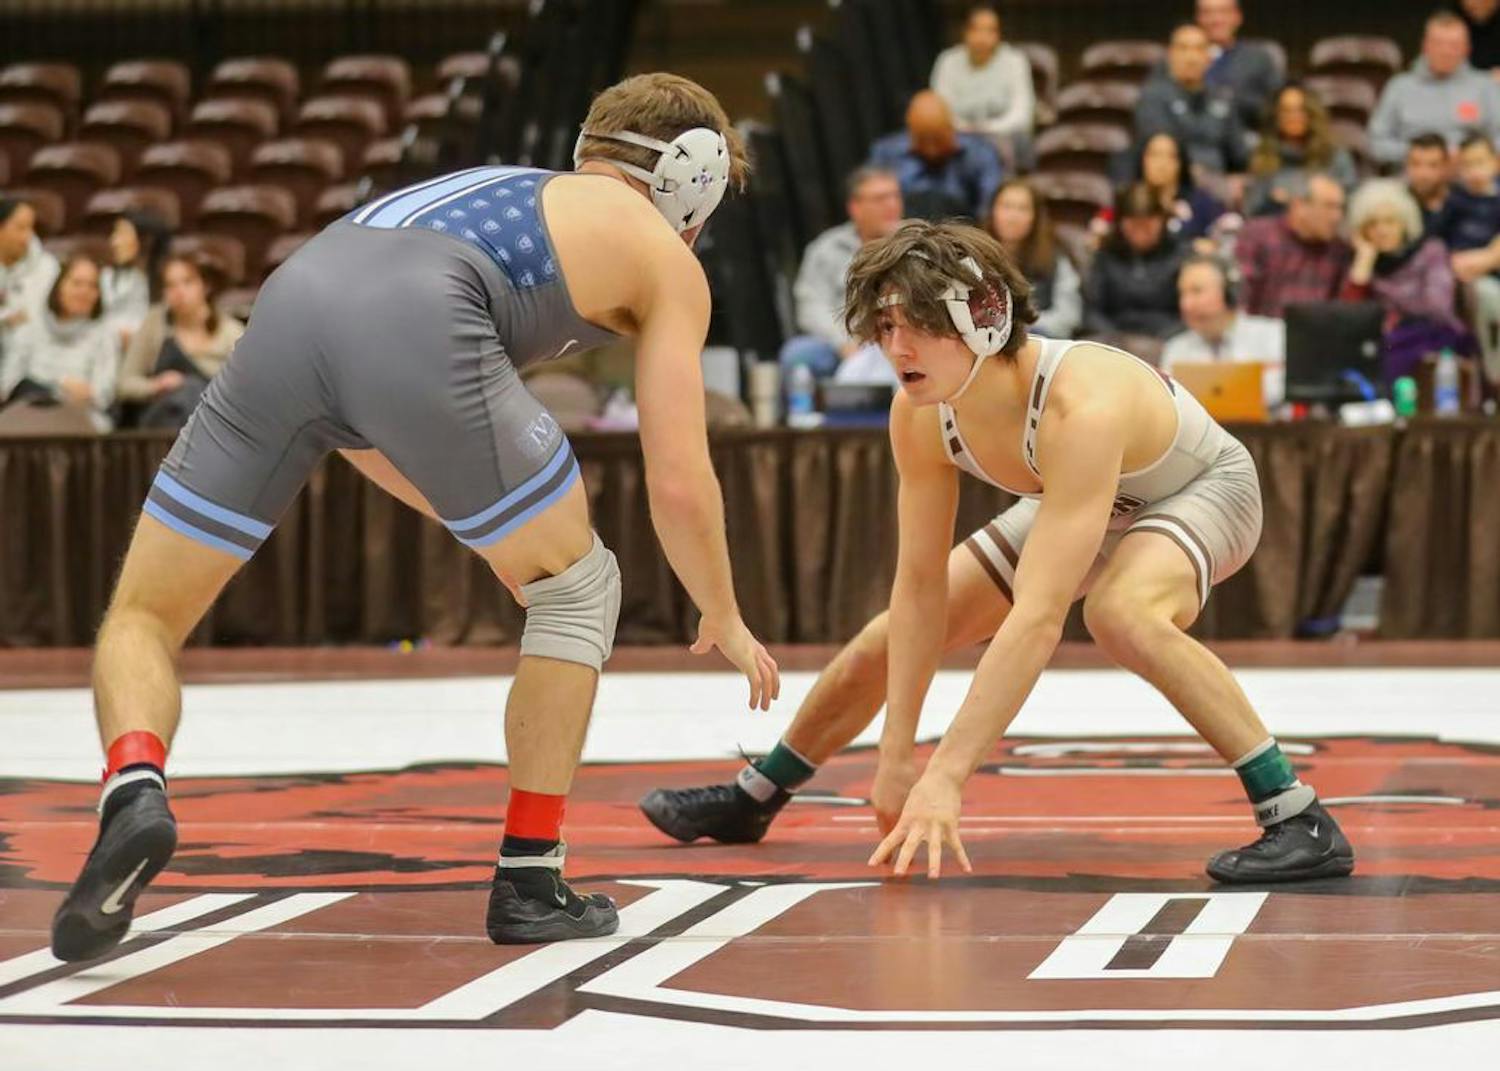 Xiang_wrestling_CO_Chip DeLorenzo via Brown Athletics.png